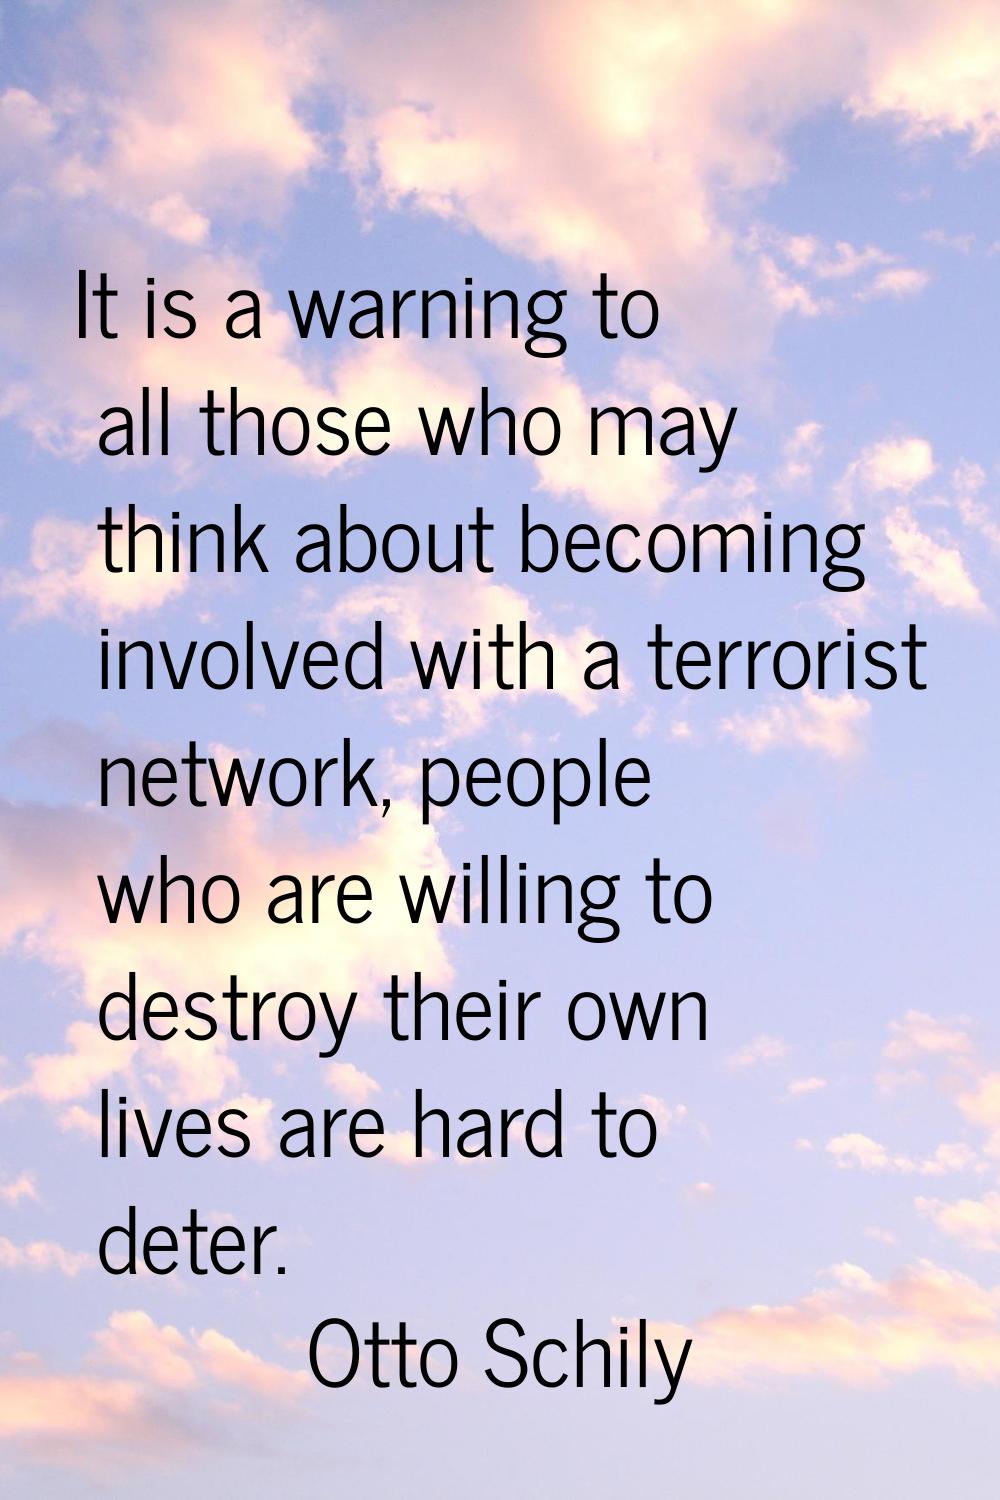 It is a warning to all those who may think about becoming involved with a terrorist network, people